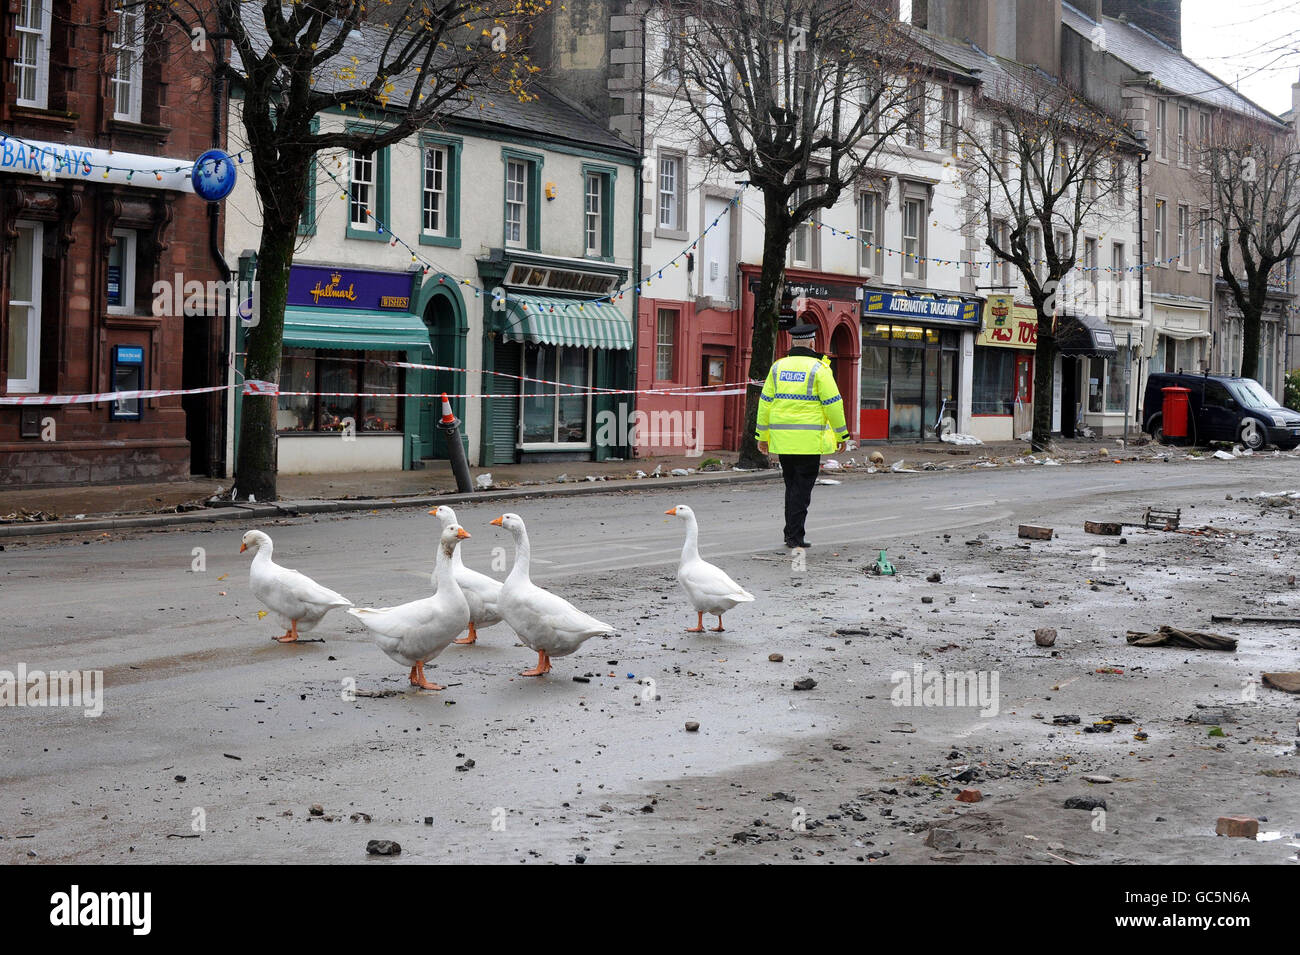 Geese walk down the high street in Cockermouth, Cumbria, where flood water has receded after torrential rain caused rivers to burst their banks. Stock Photo